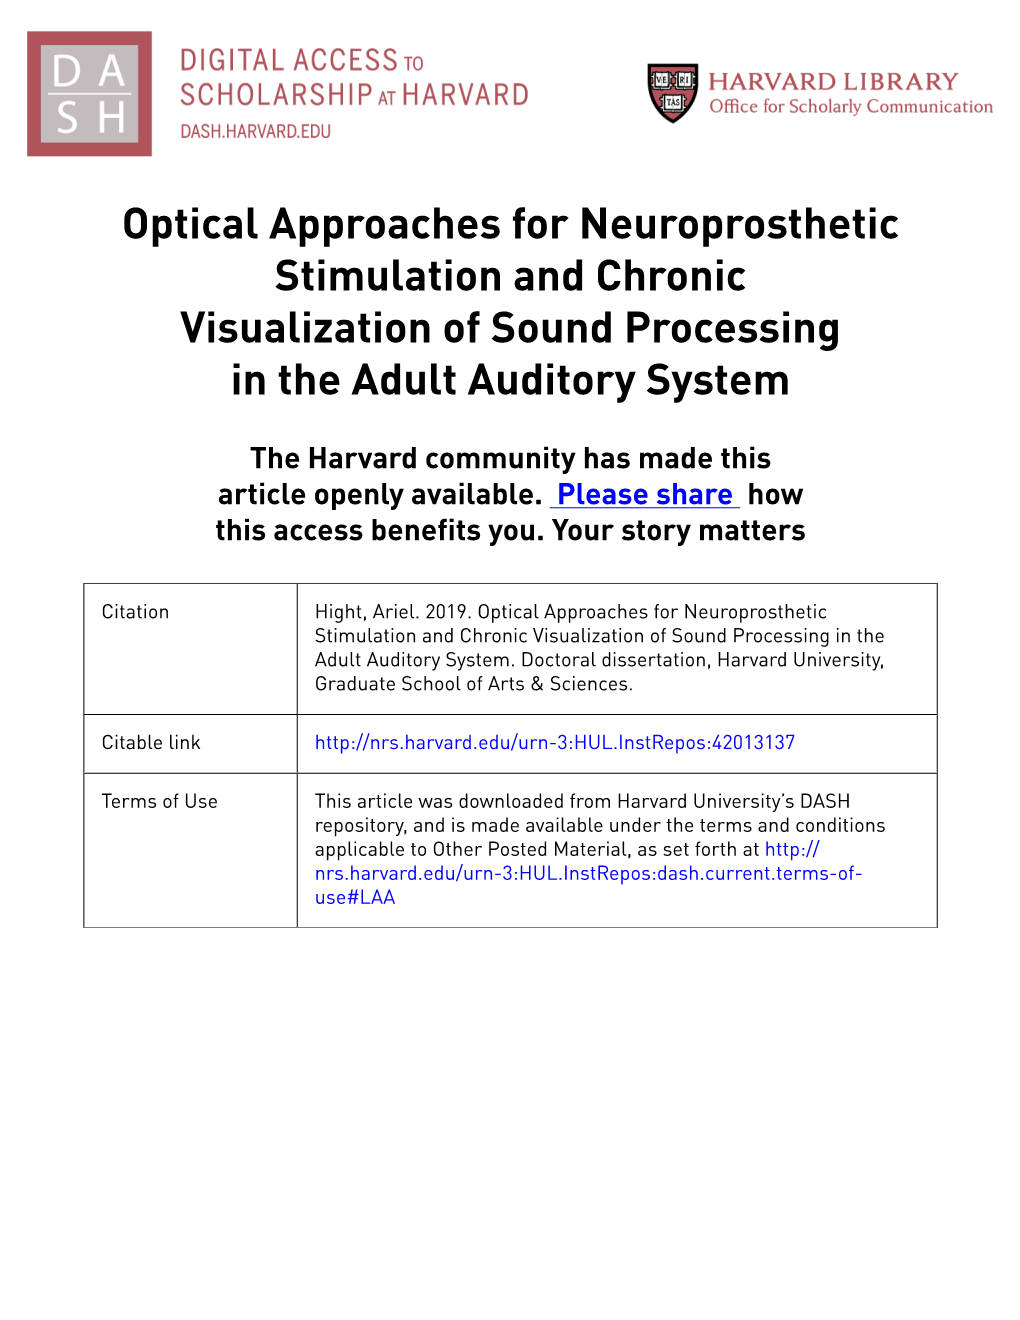 Optical Approaches for Neuroprosthetic Stimulation and Chronic Visualization of Sound Processing in the Adult Auditory System